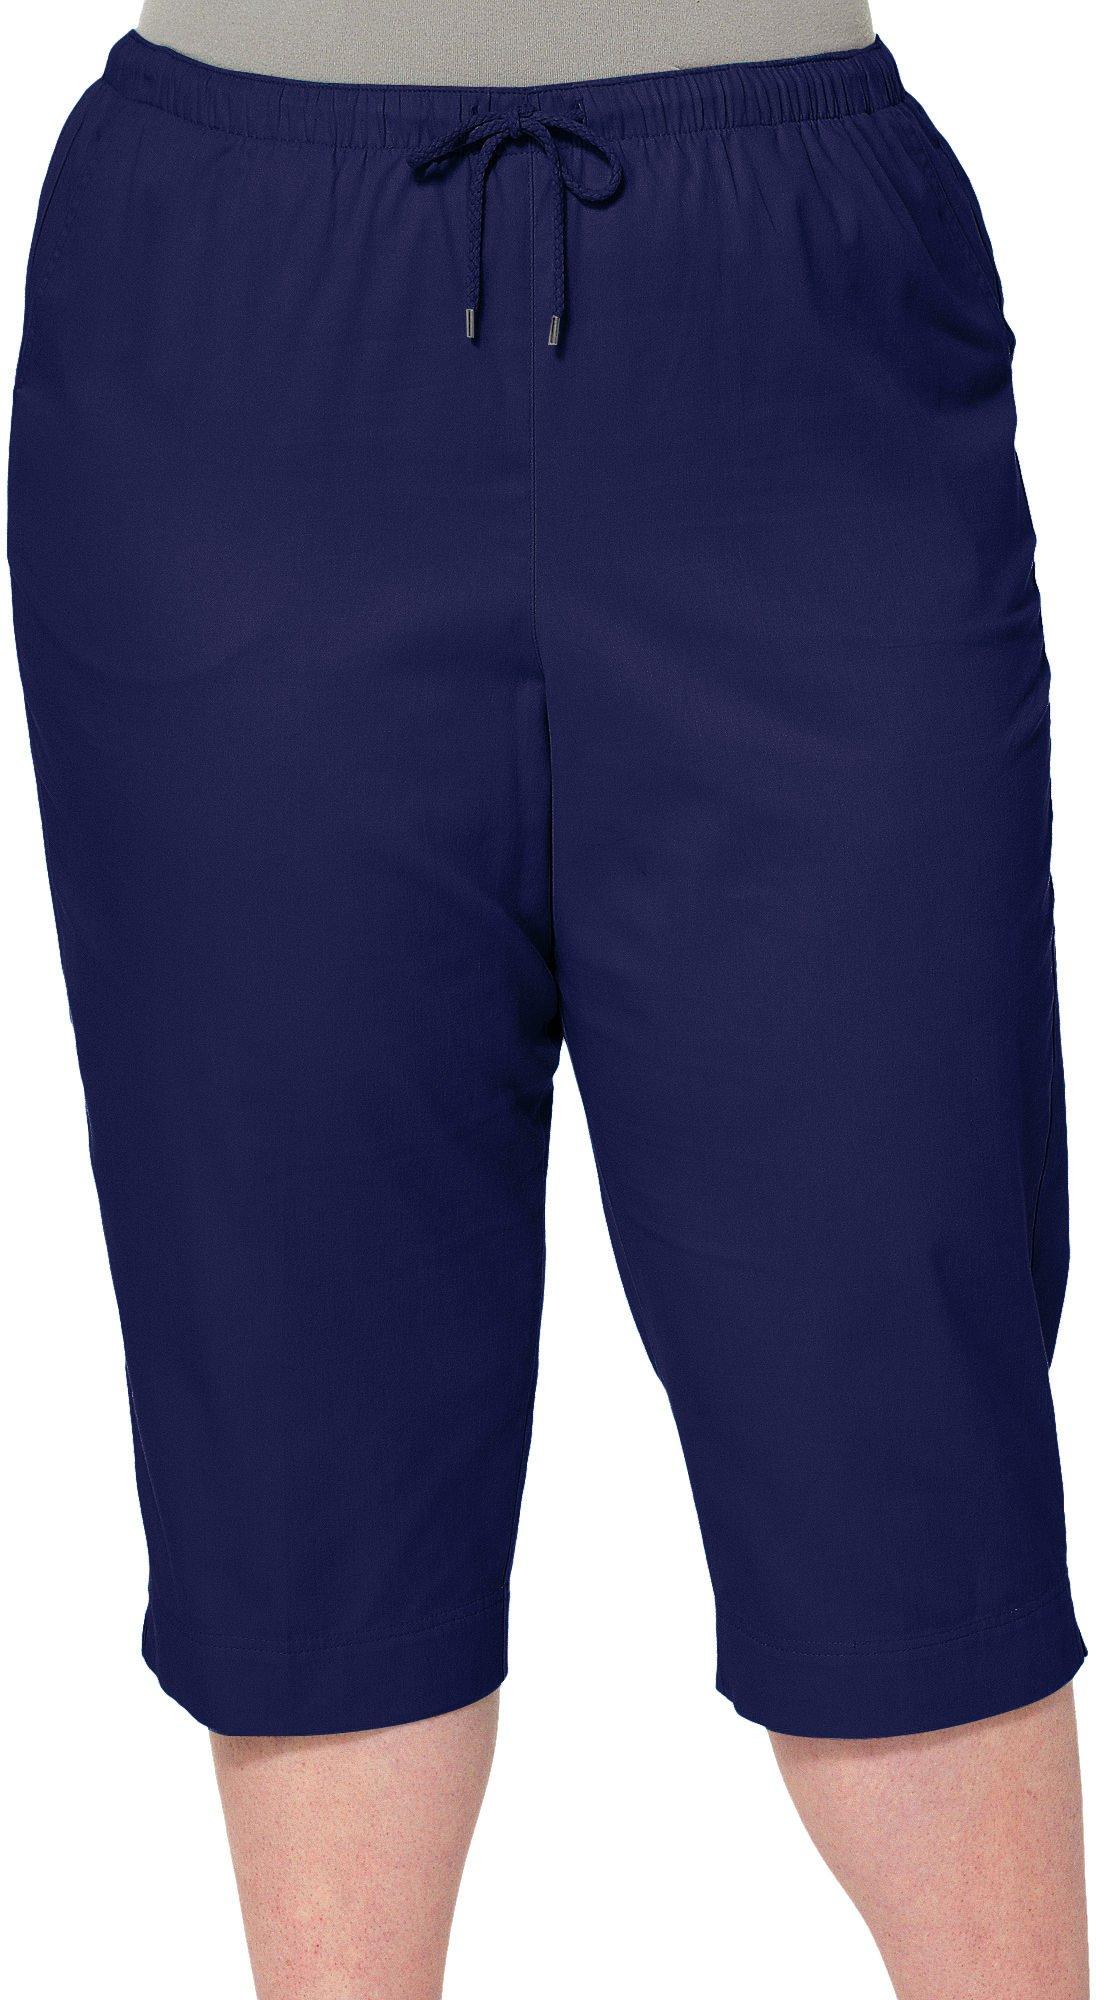 Navy Blue 100% Cotton Waffle Capri Pant, Customizable Relaxed Fit Pant,  High-rise Pant With Pockets, Plus Size, Petite, Tall Etsw -  Canada